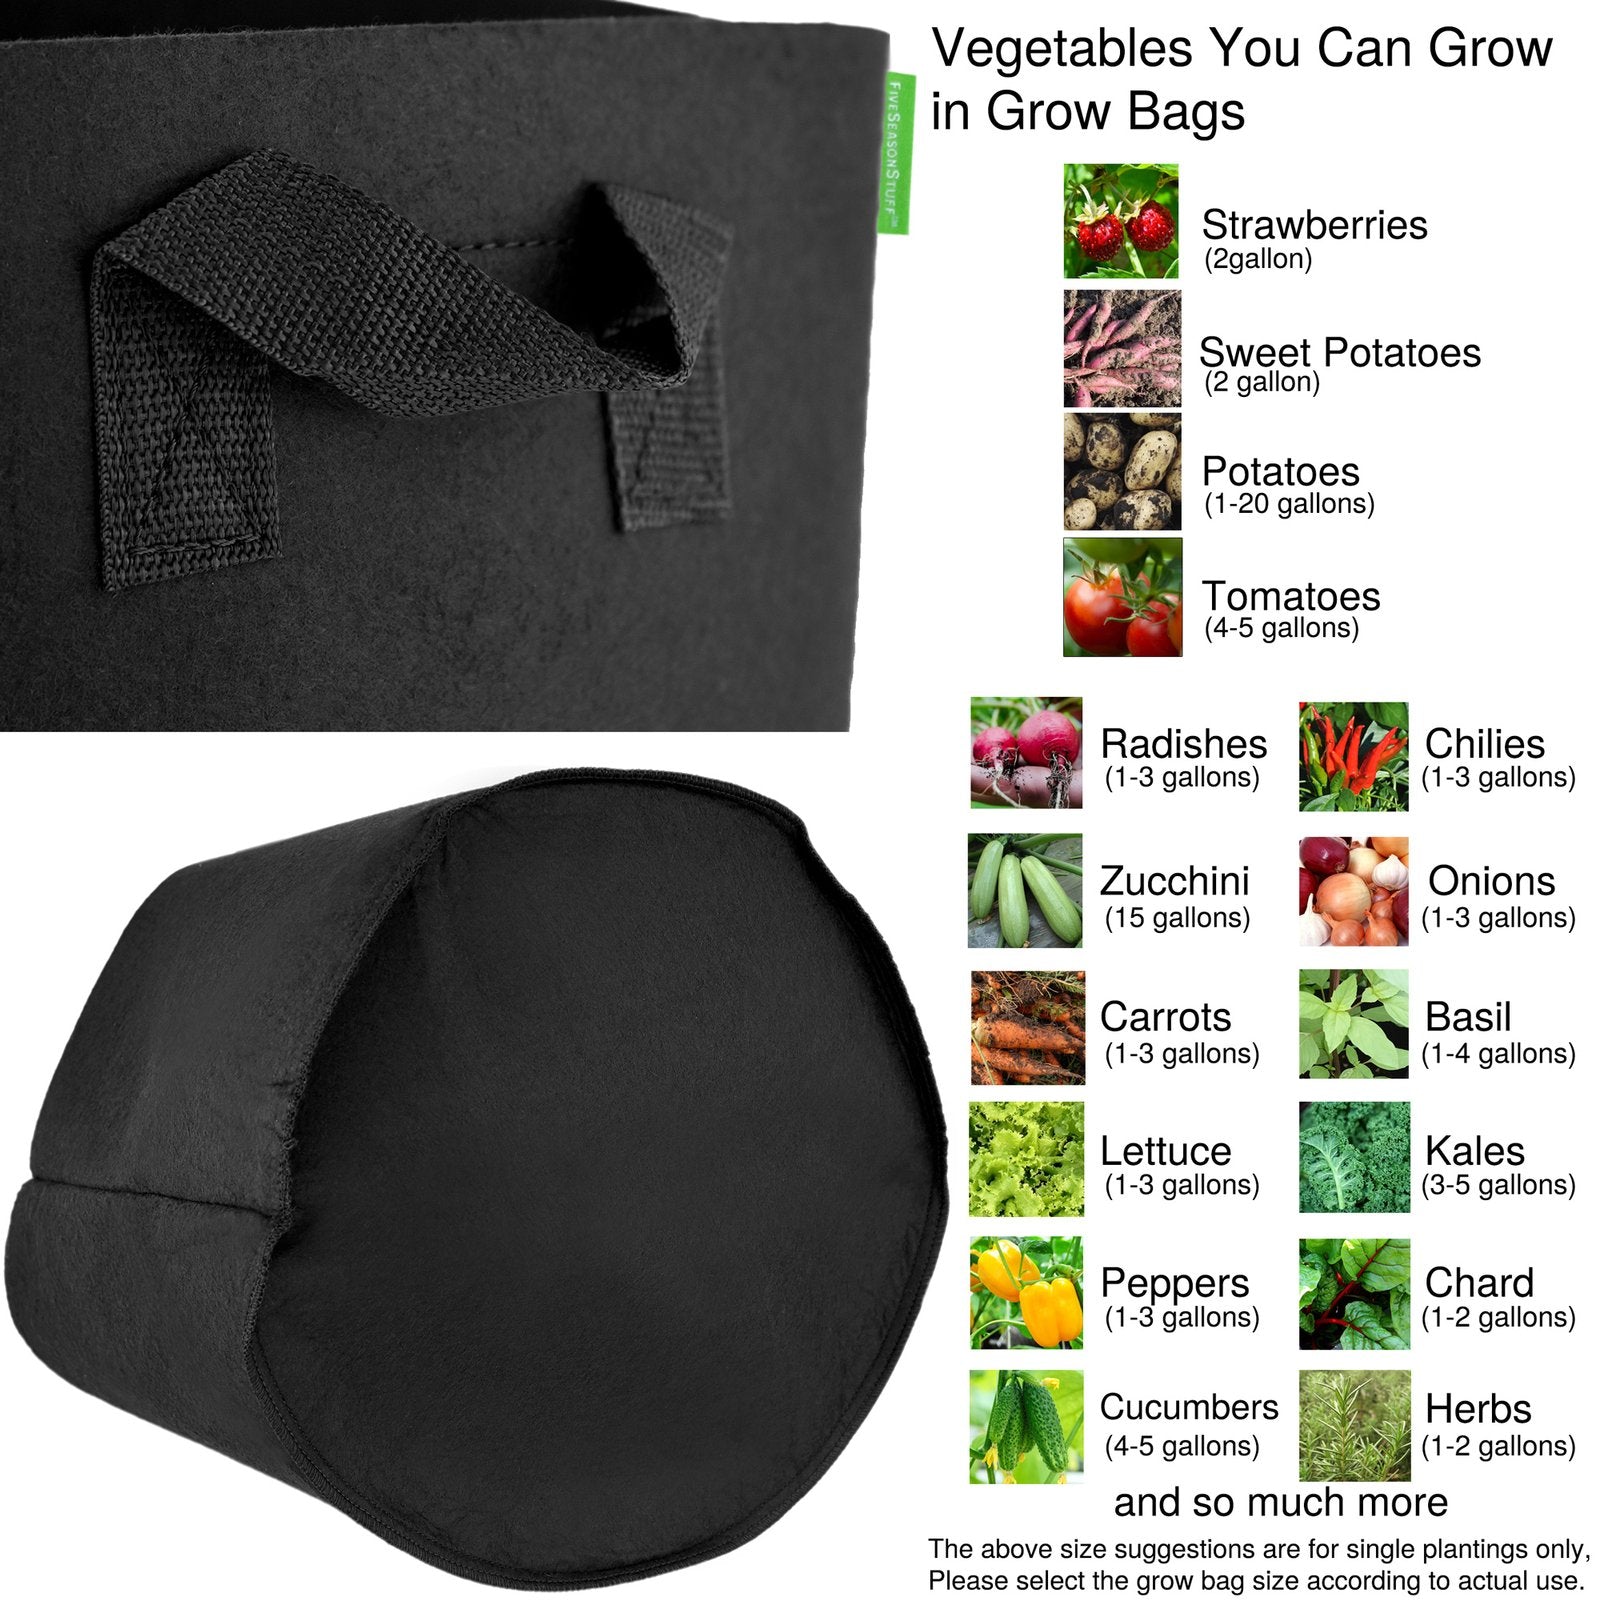 5 Pack 25 Gallons Grow Bags - Breathable Fabric Pots for Healthier Plants Vegetables Flowers – Heavy Duty Thick Containers with Sturdy Handles - Aeration Planters for Smart Gardening (Black)